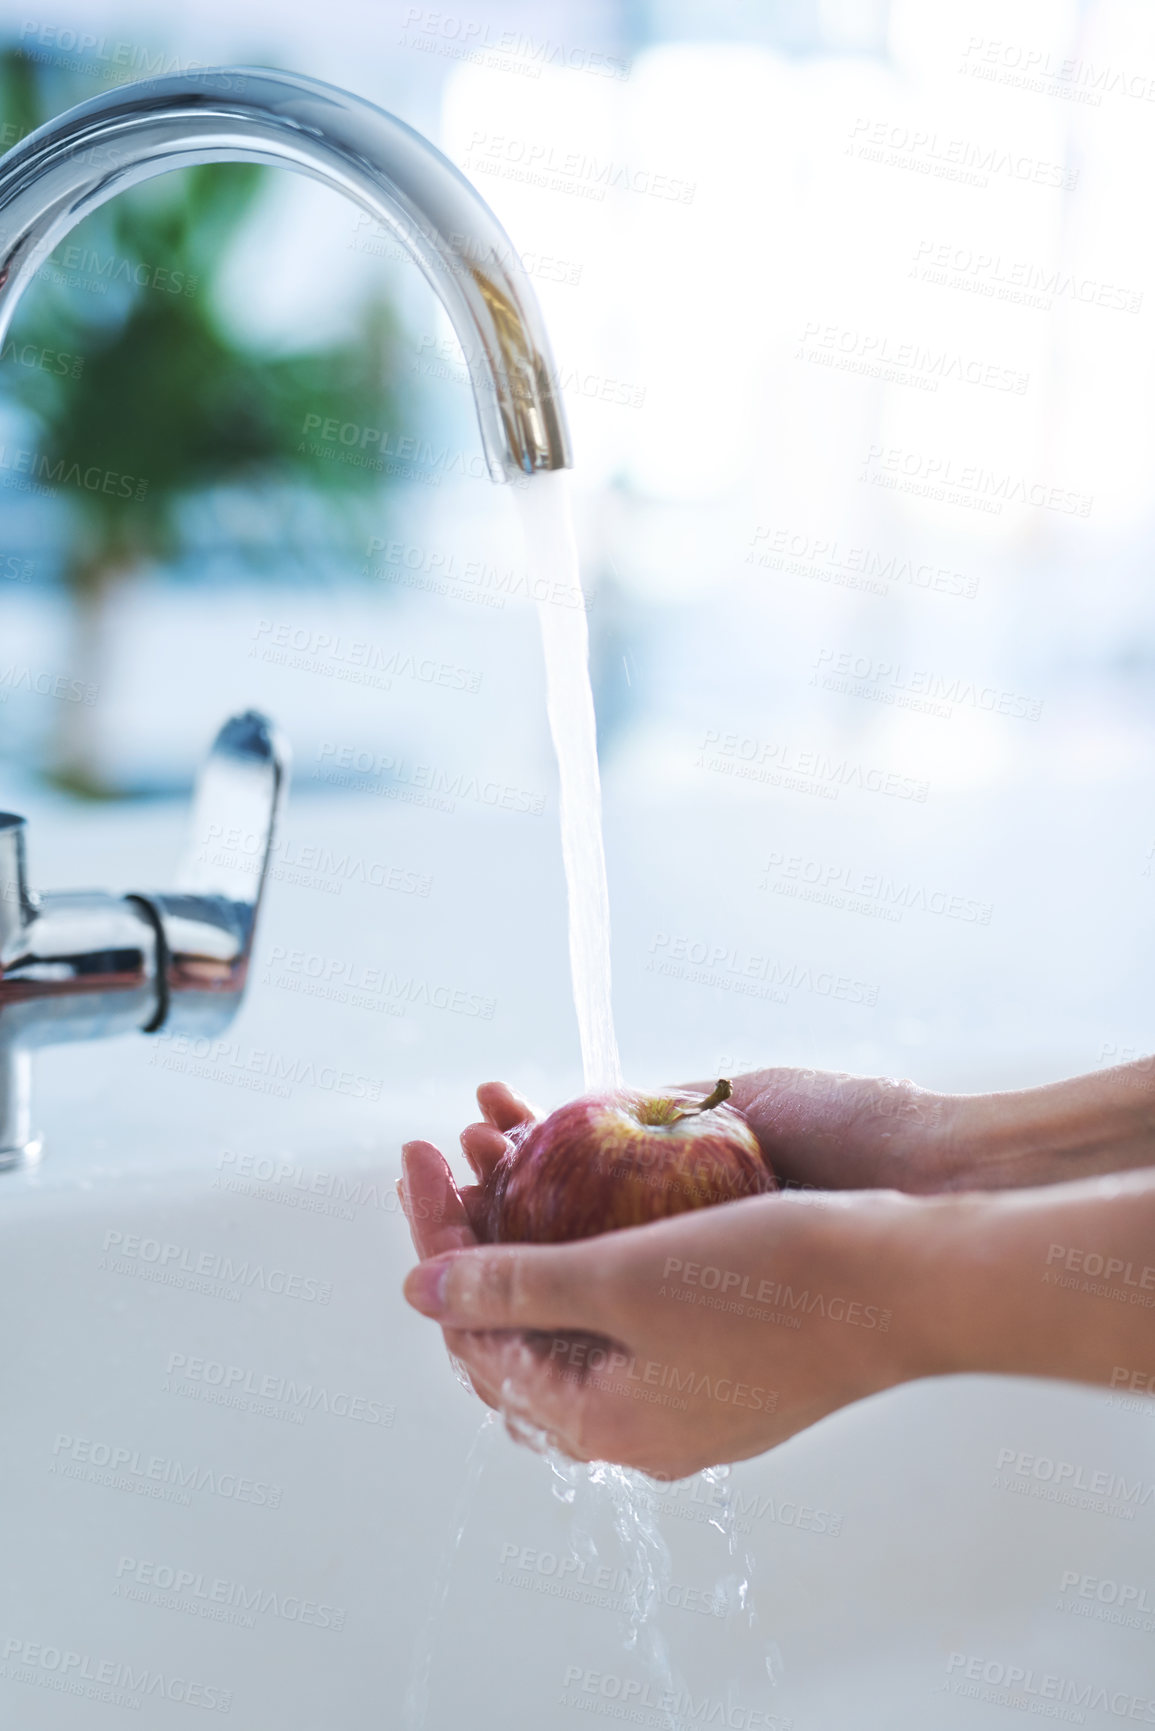 Buy stock photo Shot of a person washing an apple at a tap